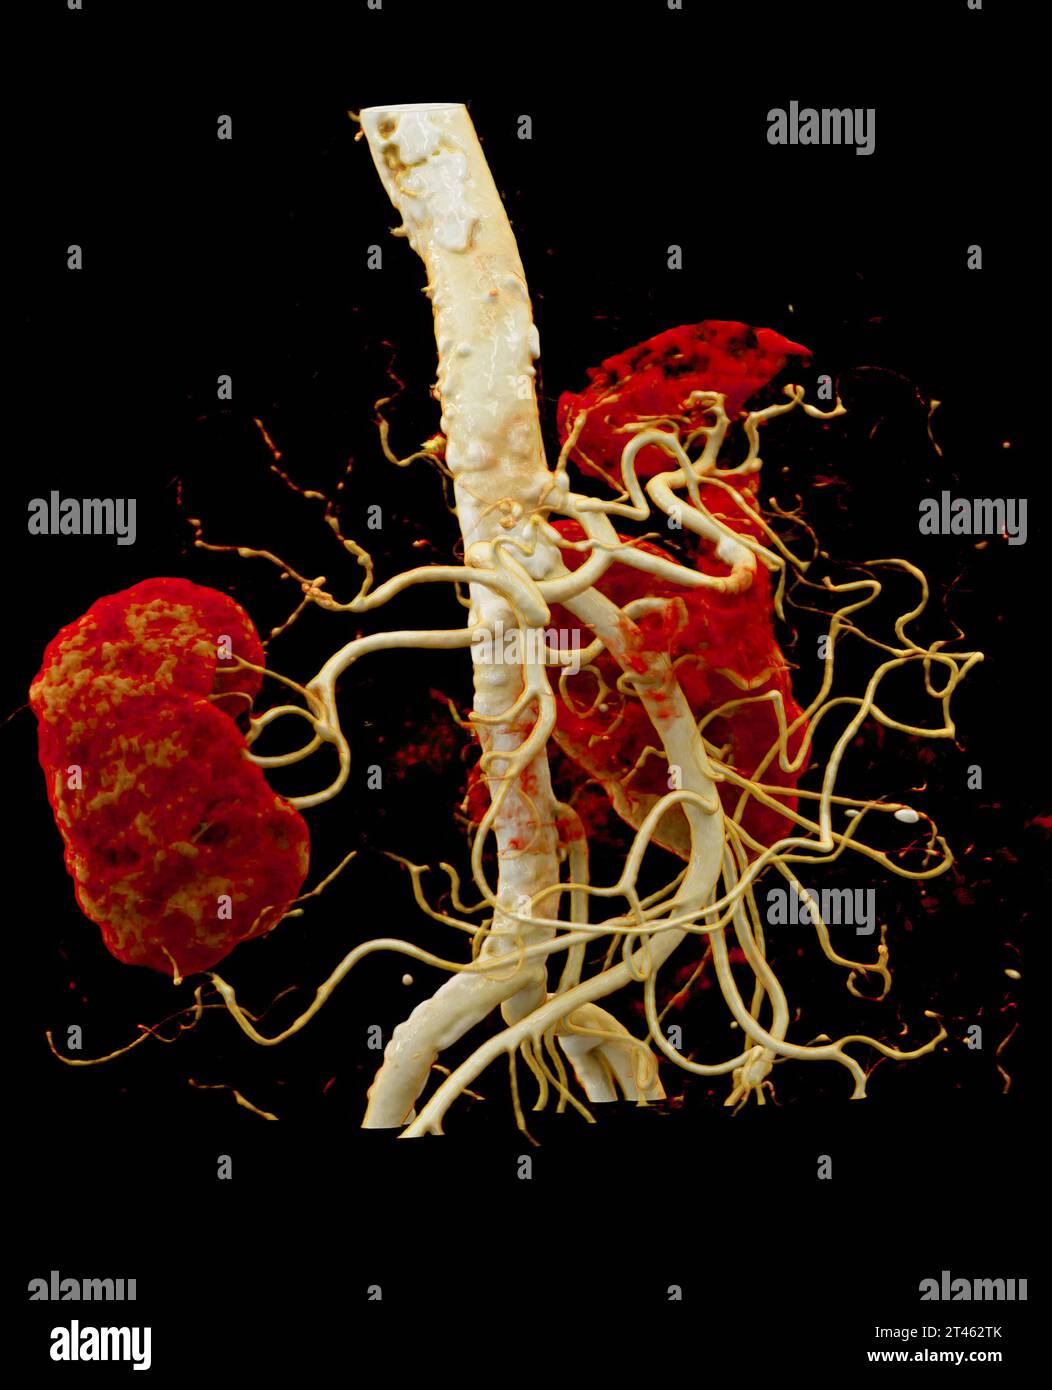 CTA Renal artery is a medical imaging procedure using CT scans to examine the renal arteries It provides detailed images of the blood vessels supplyin Stock Photo